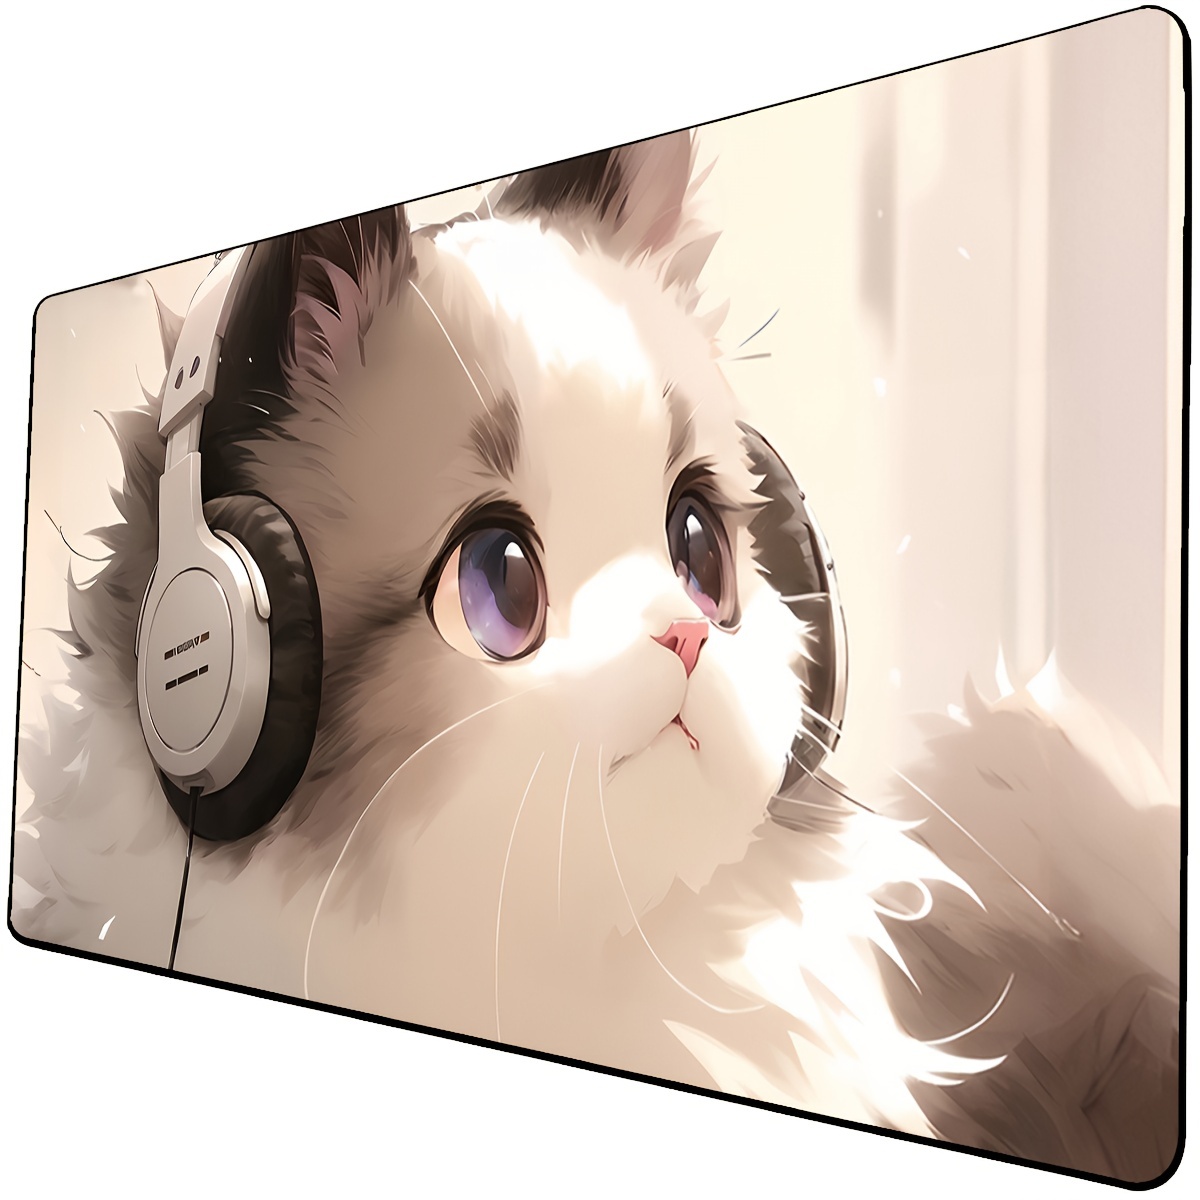 

Large Mouse Pad, Kitten Game Mouse Pad, Non Slip Mouse Pad, Suitable For Home, Office, Gaming, And Work